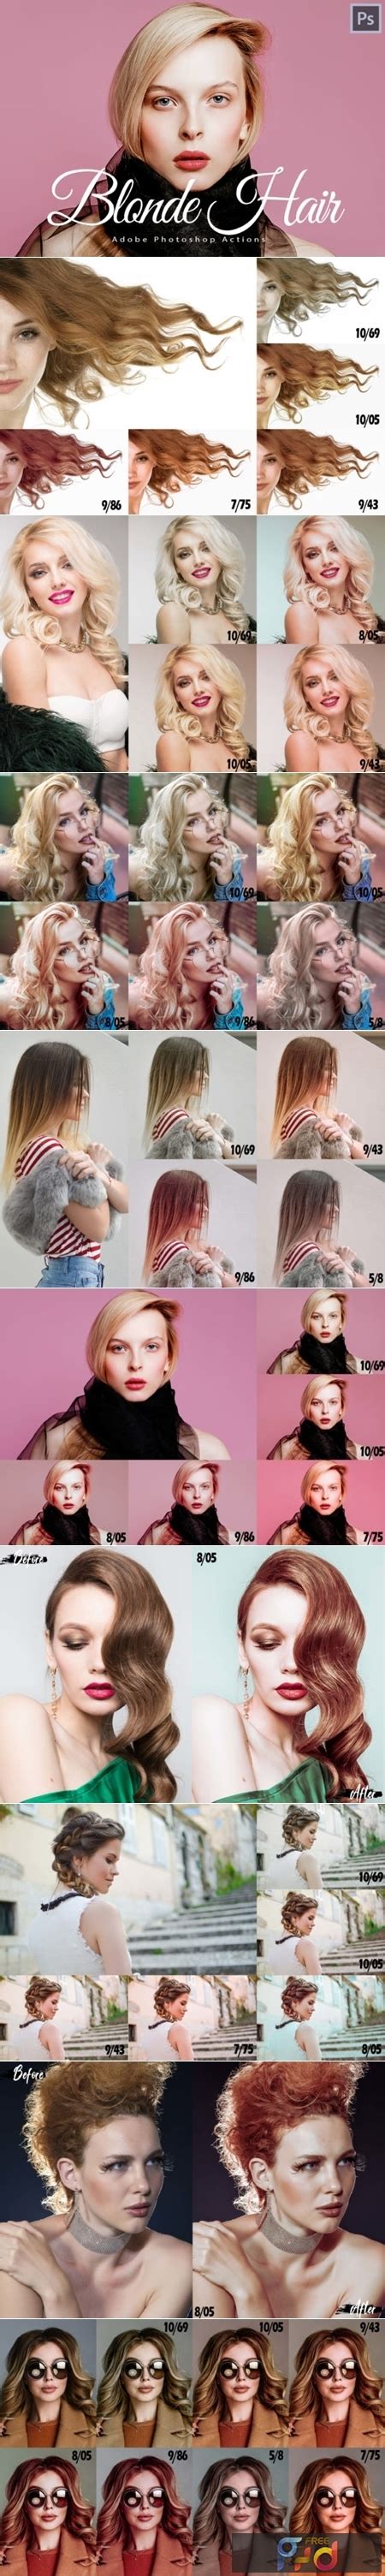 Blonde Hair Photoshop Actions Graphicux